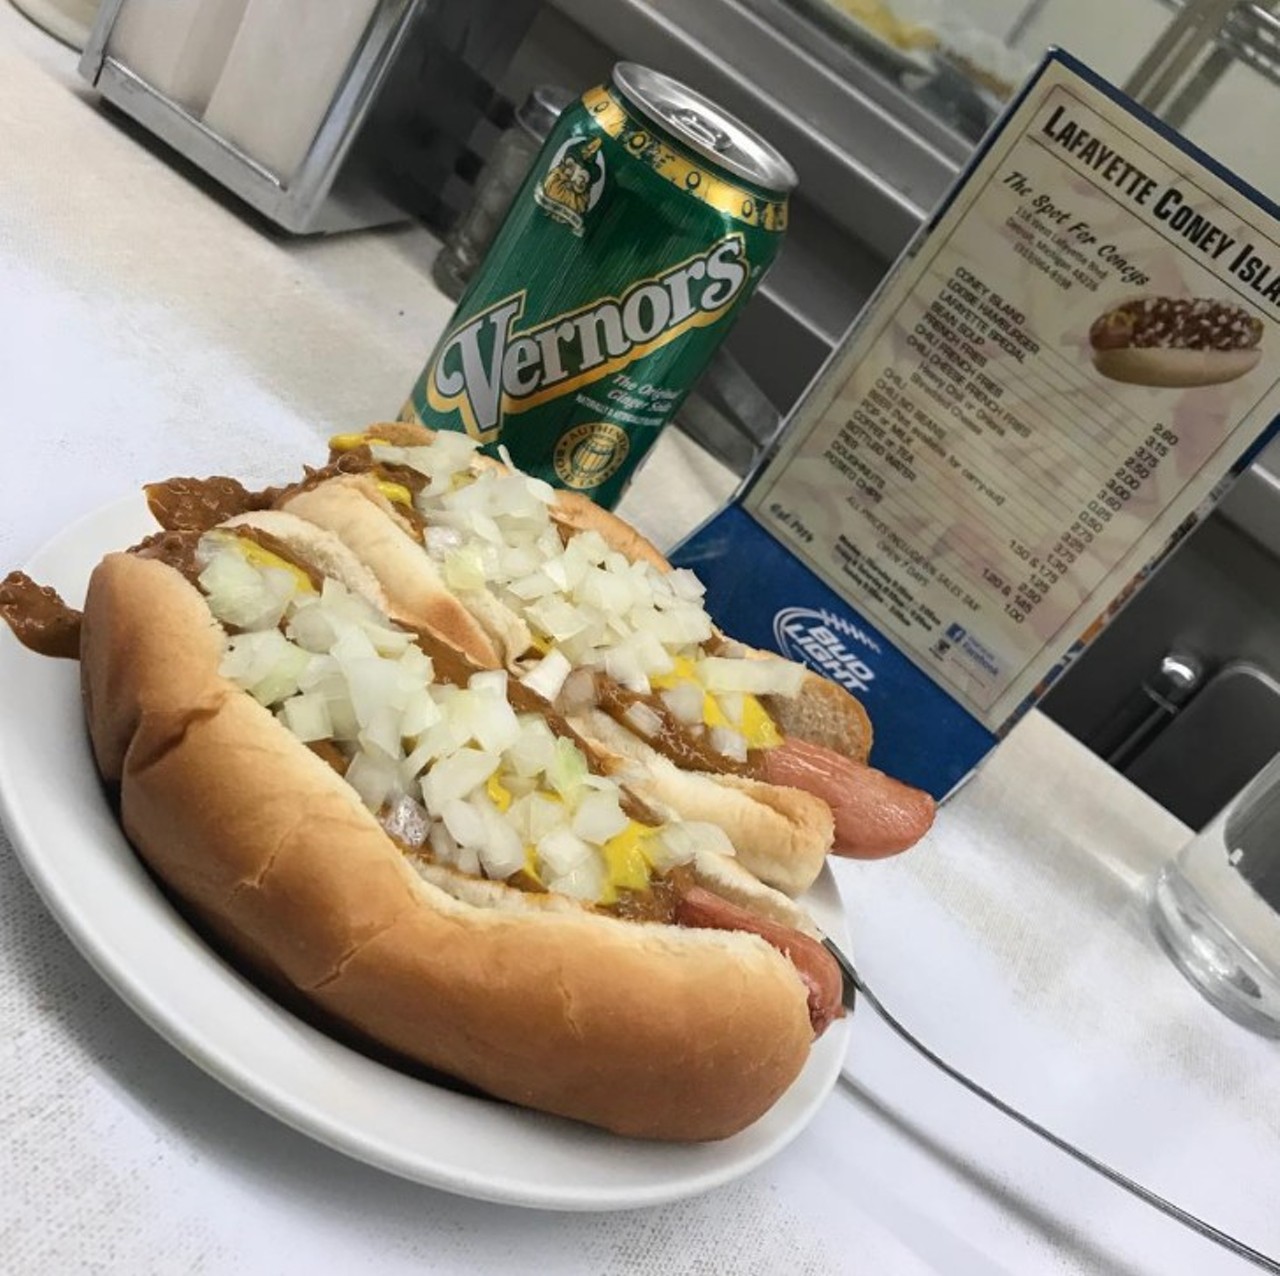 You know that coney dogs give you the runs, but you eat them anyway
I will regret this.
Photo courtesy of @mingchen37